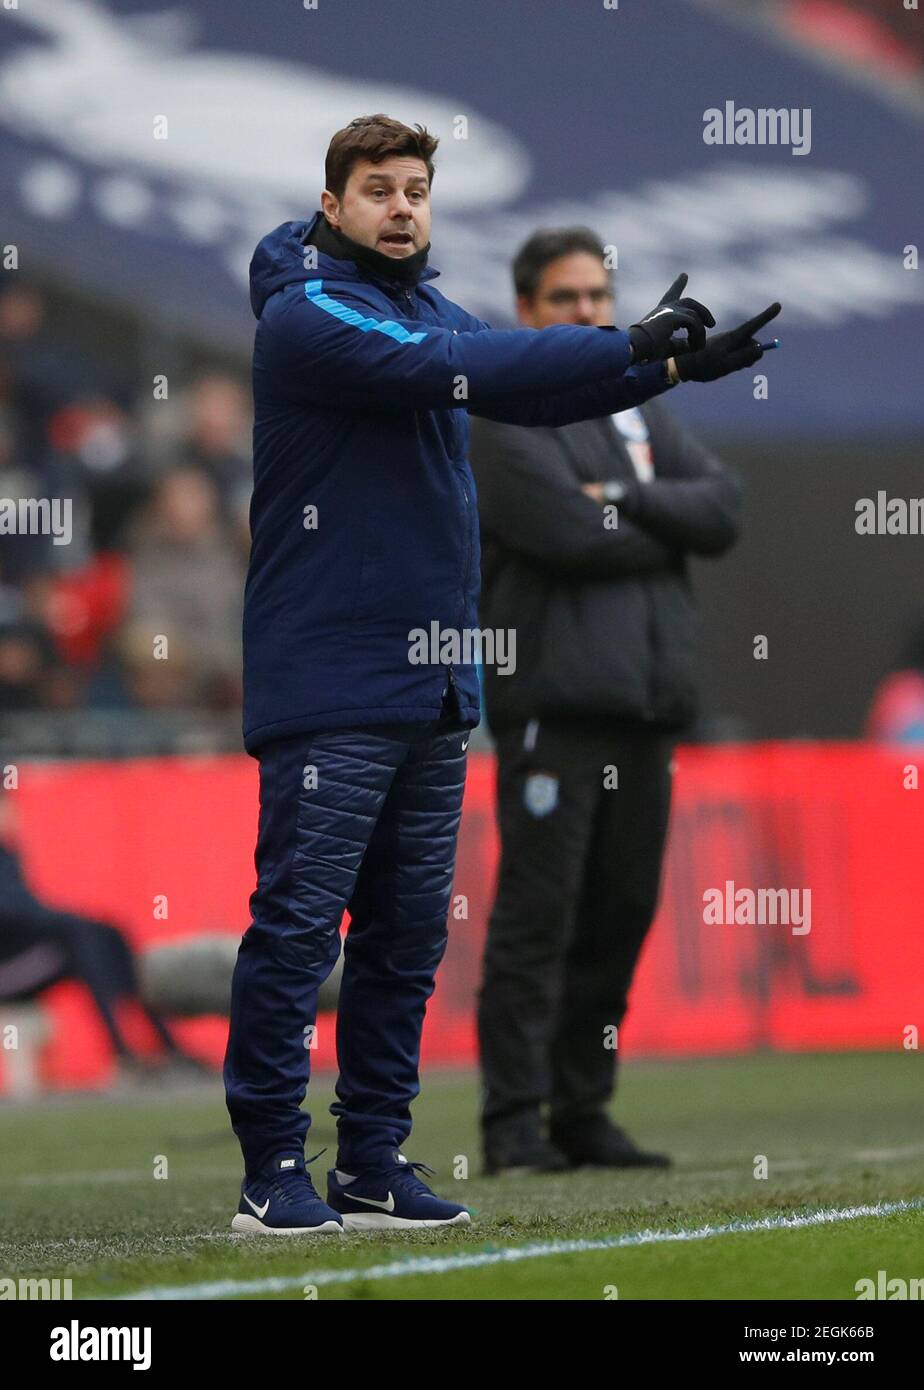 Soccer Football - Premier League - Tottenham Hotspur vs Huddersfield Town - Wembley Stadium, London, Britain - March 3, 2018   Tottenham manager Mauricio Pochettino as Huddersfield Town manager David Wagner looks on   REUTERS/Eddie Keogh    EDITORIAL USE ONLY. No use with unauthorized audio, video, data, fixture lists, club/league logos or 'live' services. Online in-match use limited to 75 images, no video emulation. No use in betting, games or single club/league/player publications.  Please contact your account representative for further details. Stock Photo